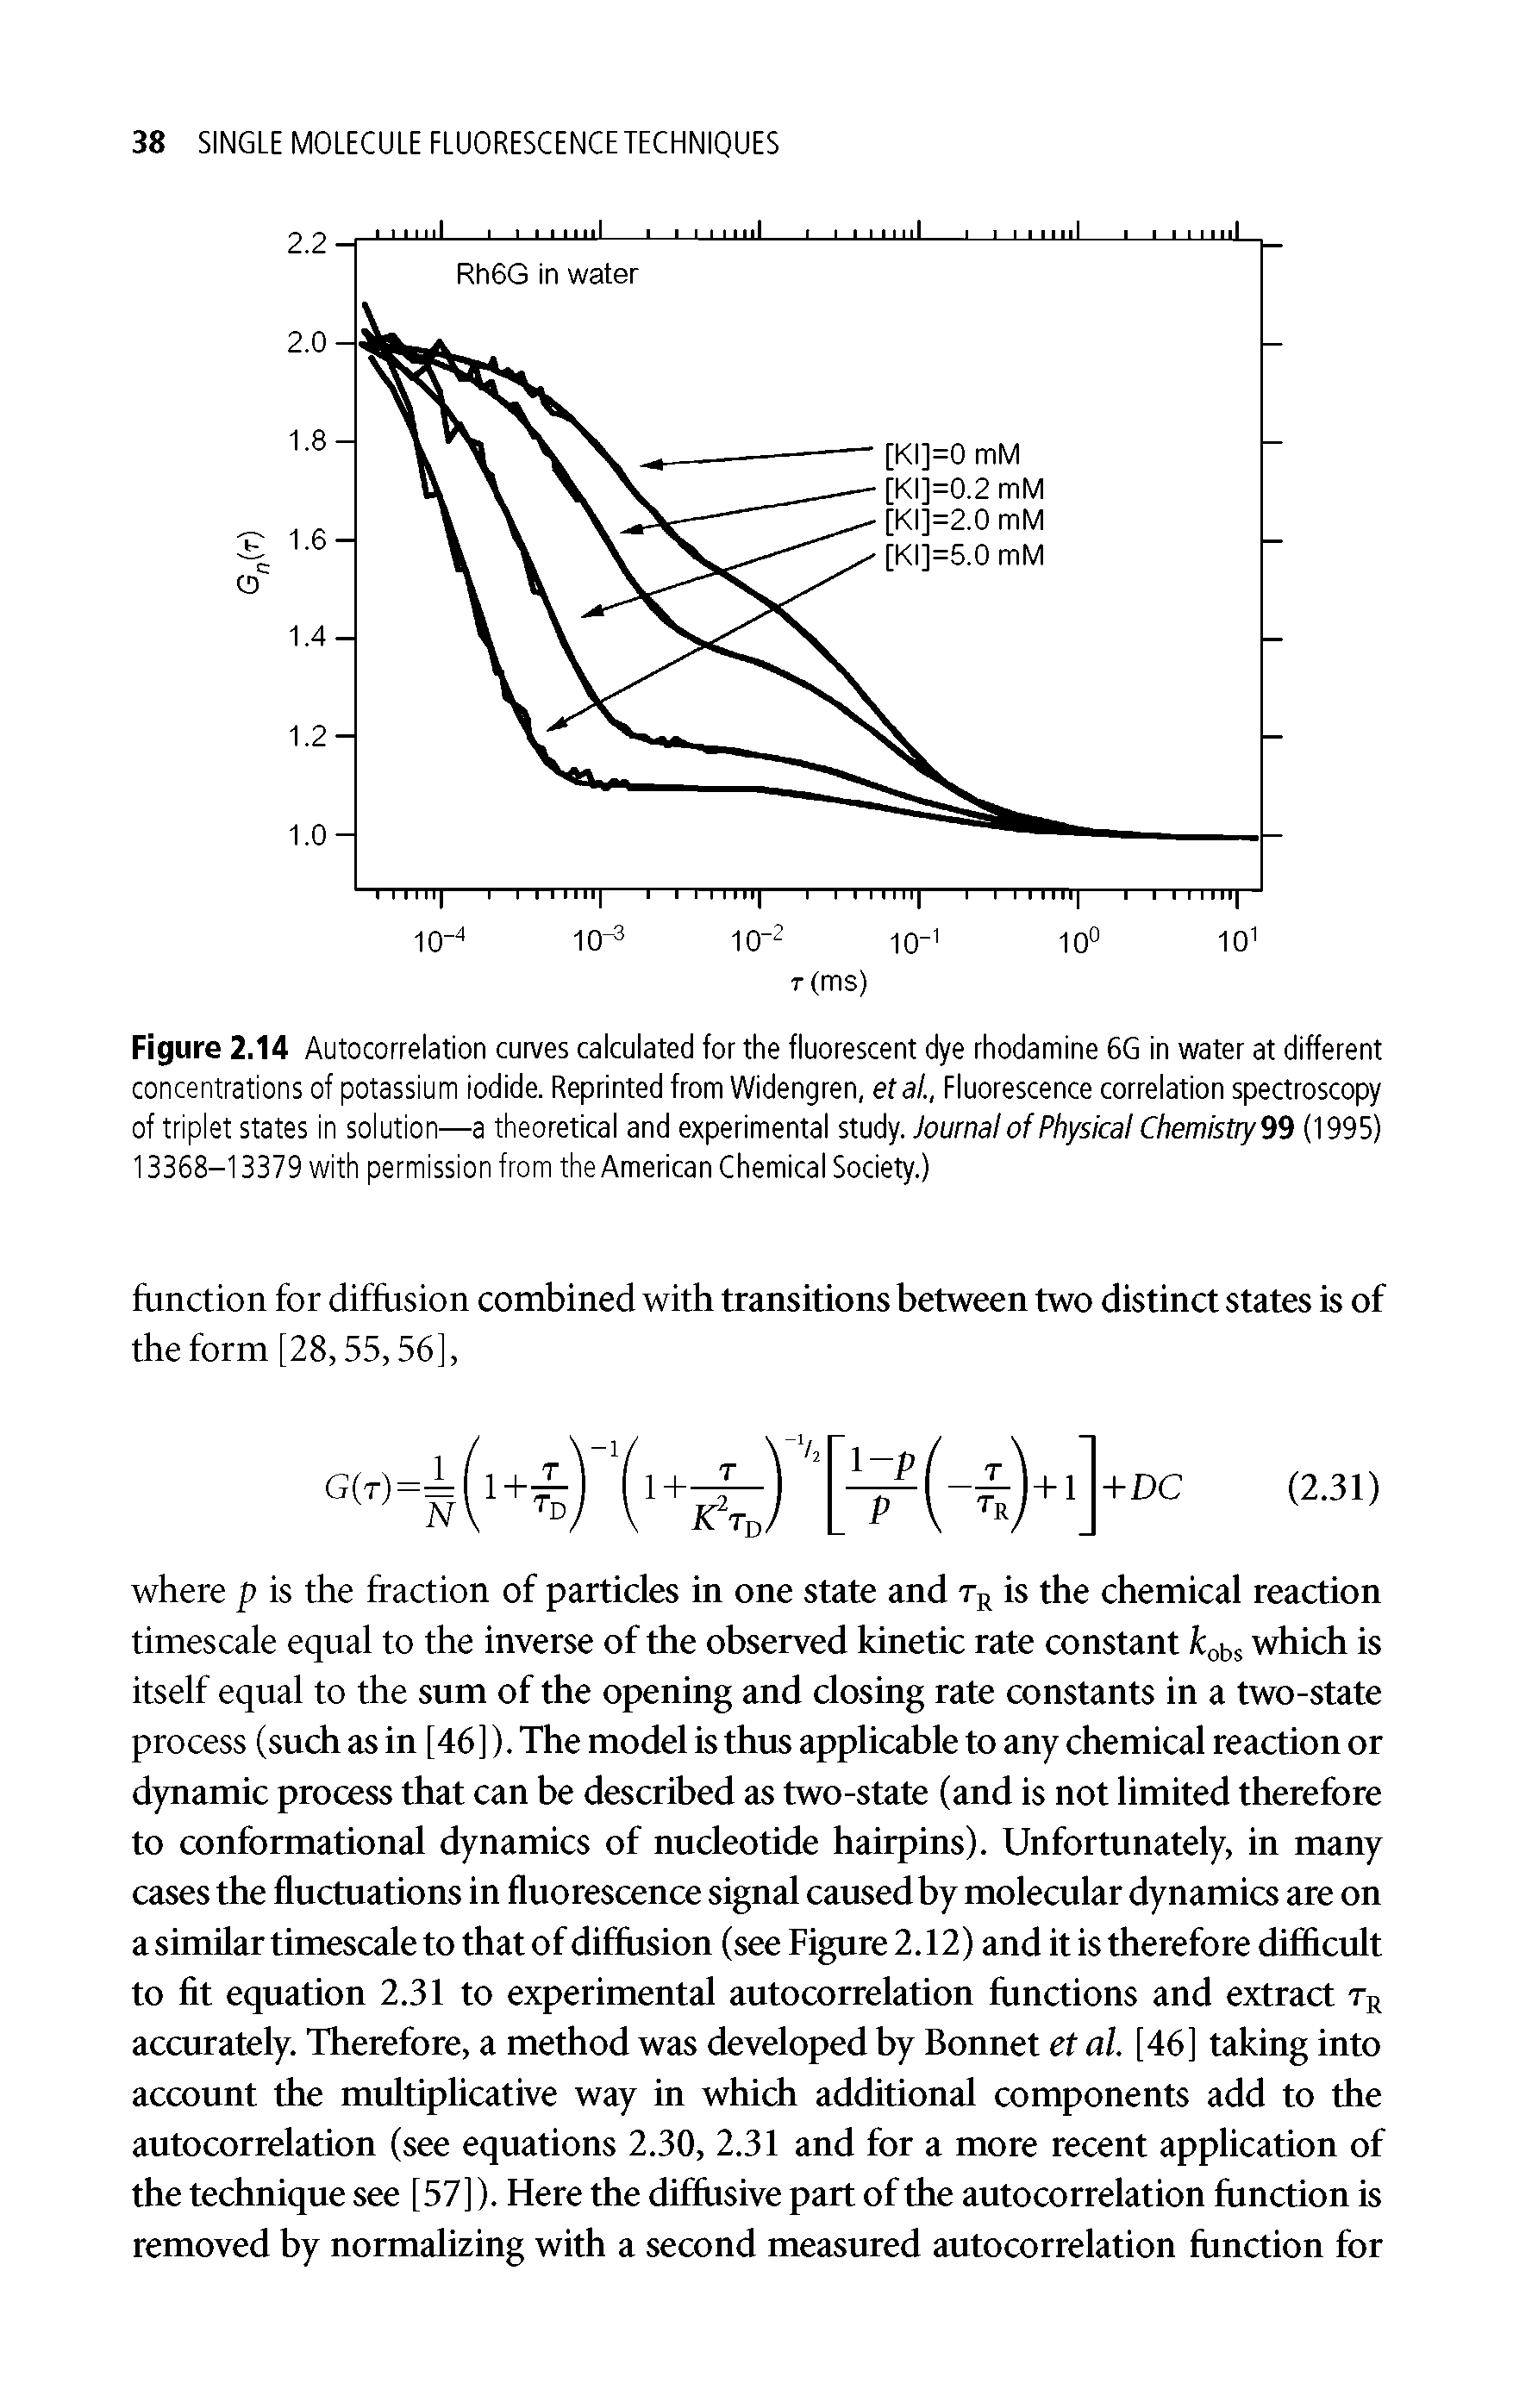 Figure 2.14 Autocorrelation curves calculated for the fluorescent dye rhodamine 6G in water at different concentrations of potassium iodide. Reprinted from Widengren, etal., Fluorescence correlation spectroscopy of triplet states in solution—a theoretical and experimental stud /. Journal of Physical Chemistry99 (1995) 13368-13379 with permission from the American Chemical Society.)...